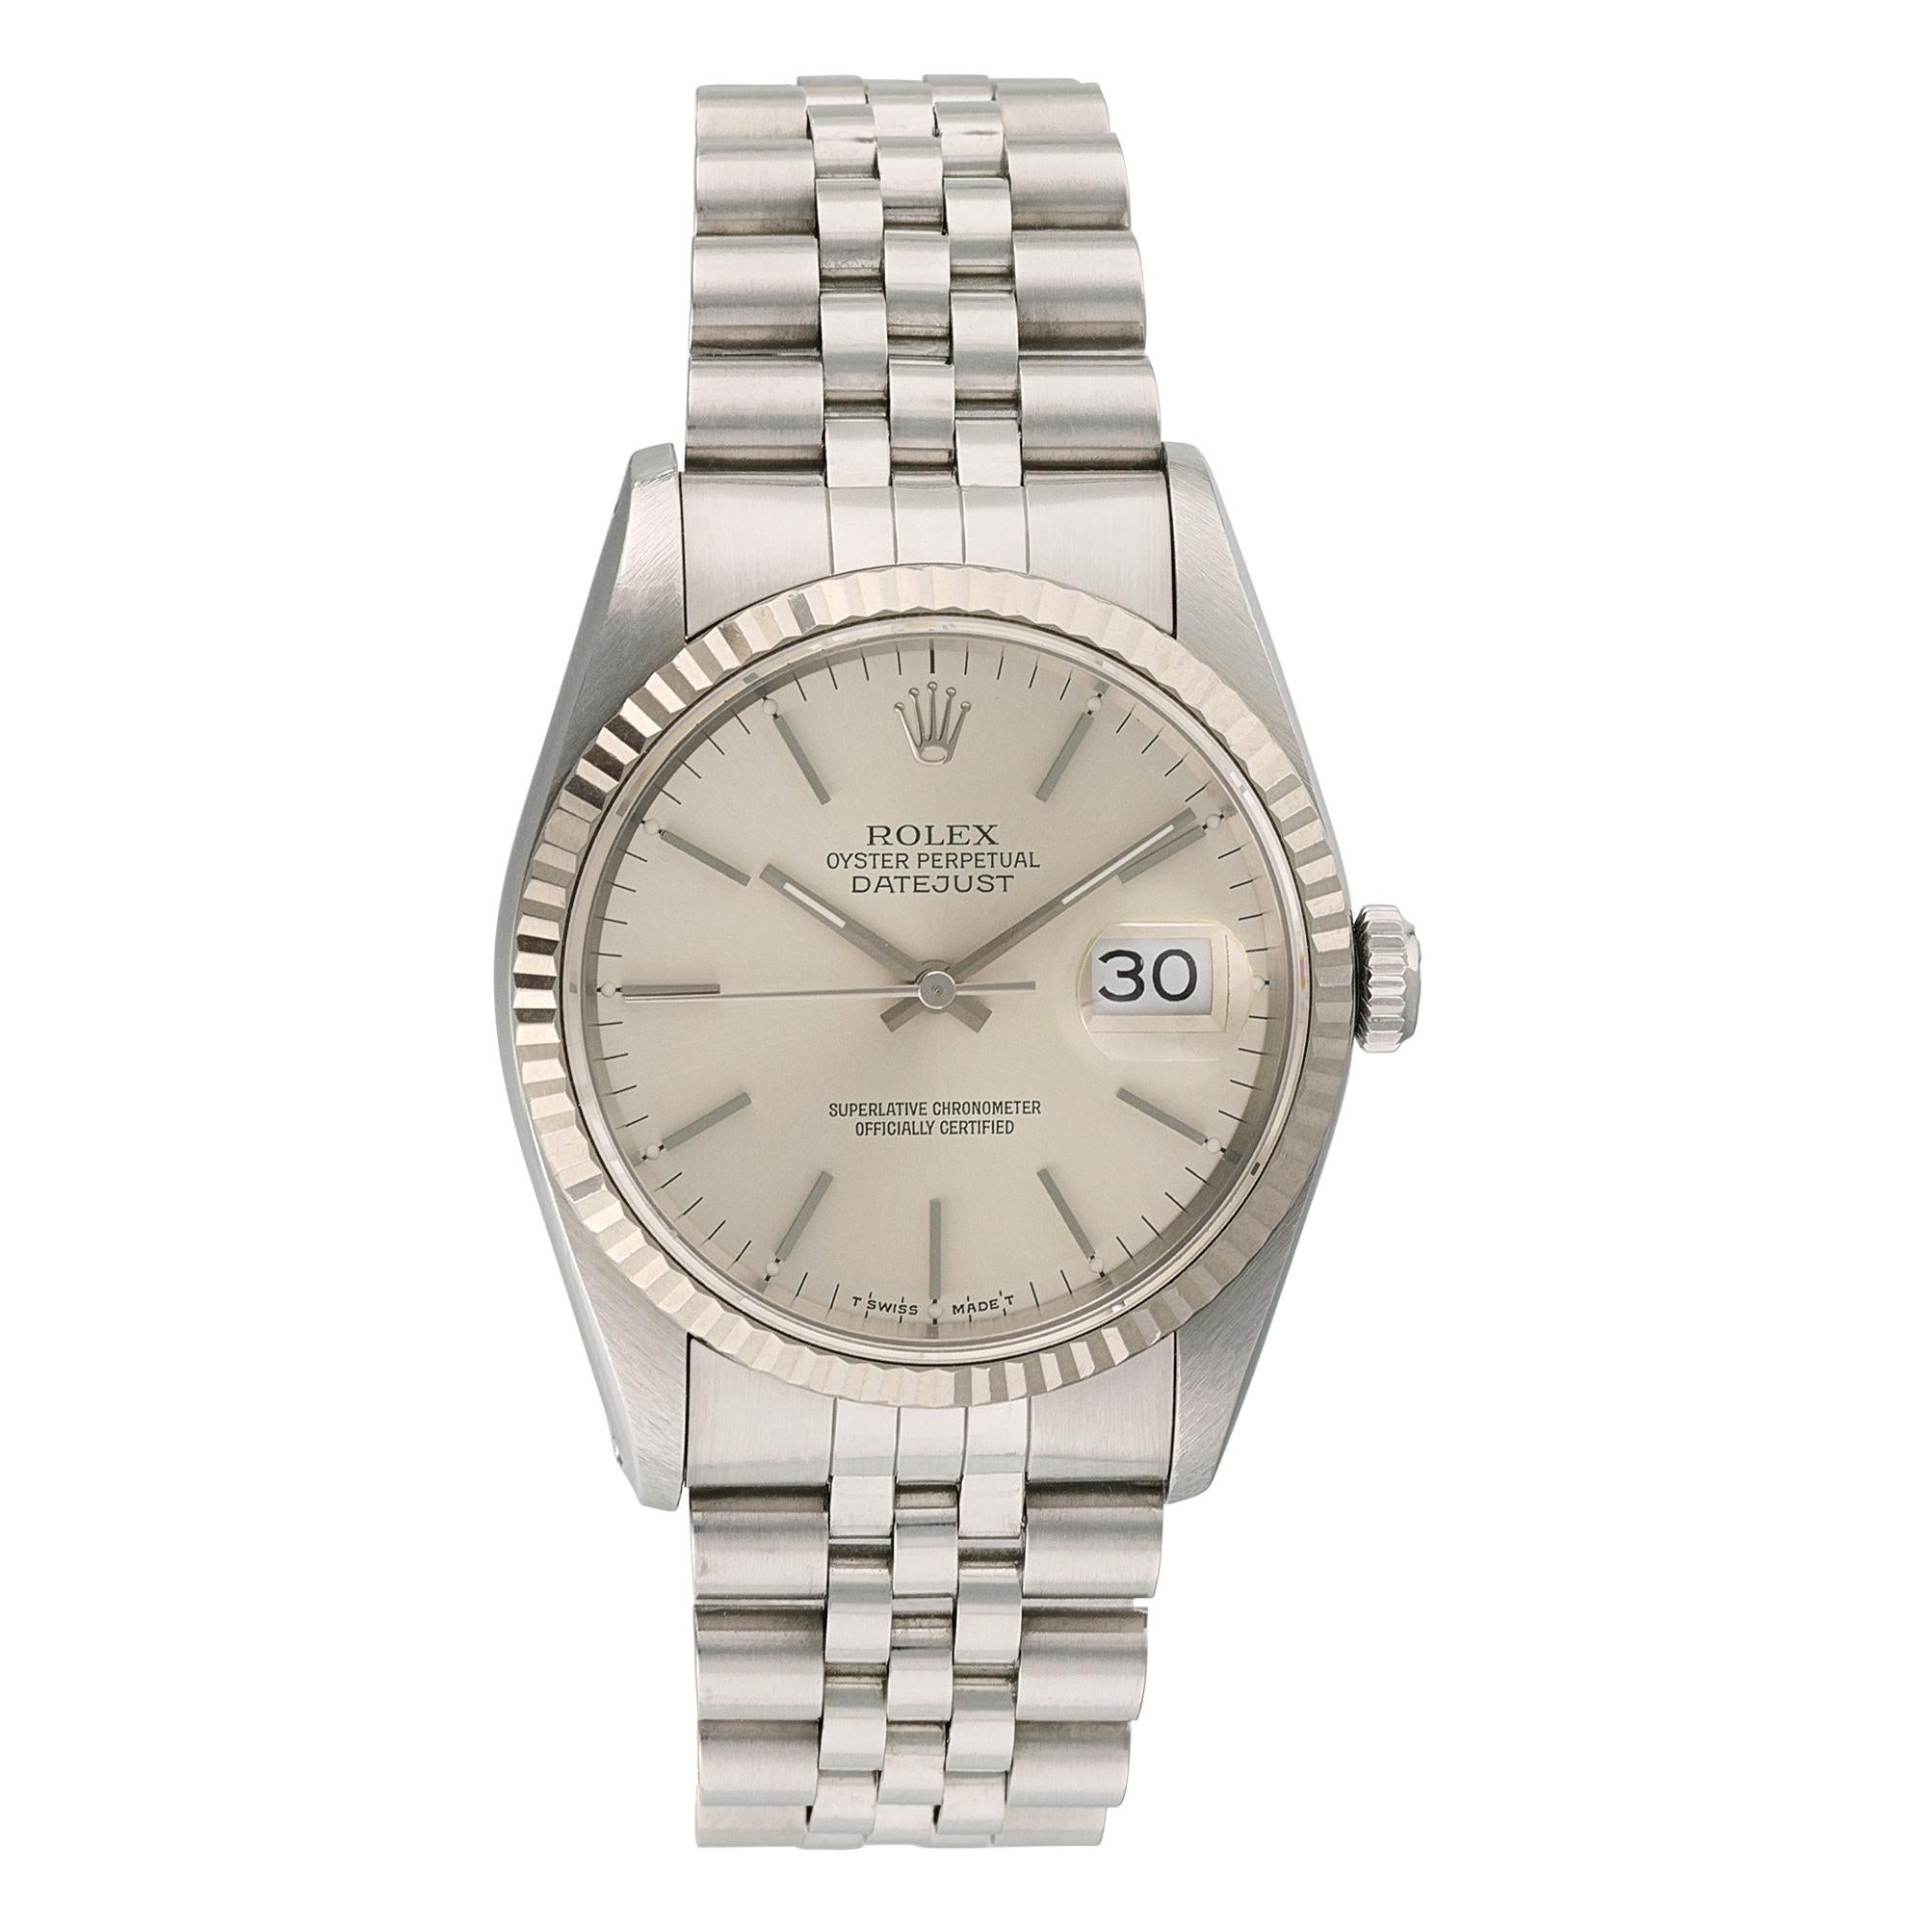 Rolex Oyster Perpetual Datejust 16234 Mens Watch. 
36mm Stainless Steel case. 
White Gold fluted bezel. 
Silver dial with Luminous Steel hands and index hour markers. 
Minute markers on the outer dial. 
Date display at the 3 o'clock position.